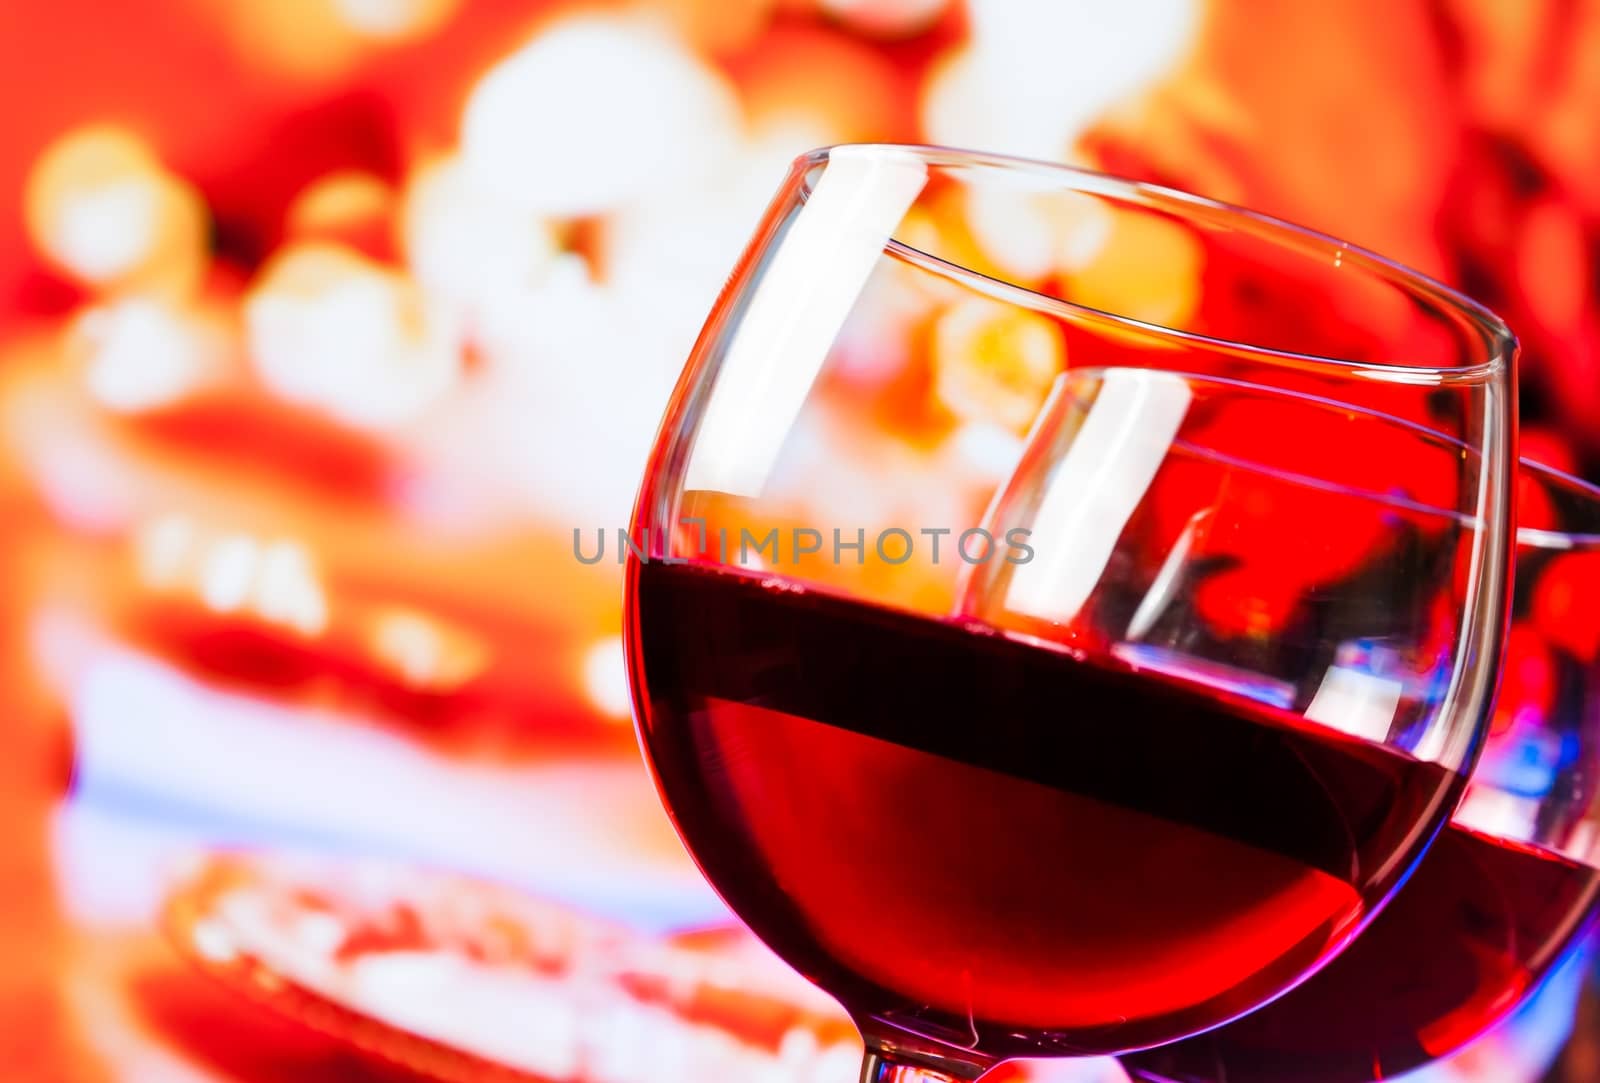 detail of red wine glasses against unfocused restaurant table background by donfiore